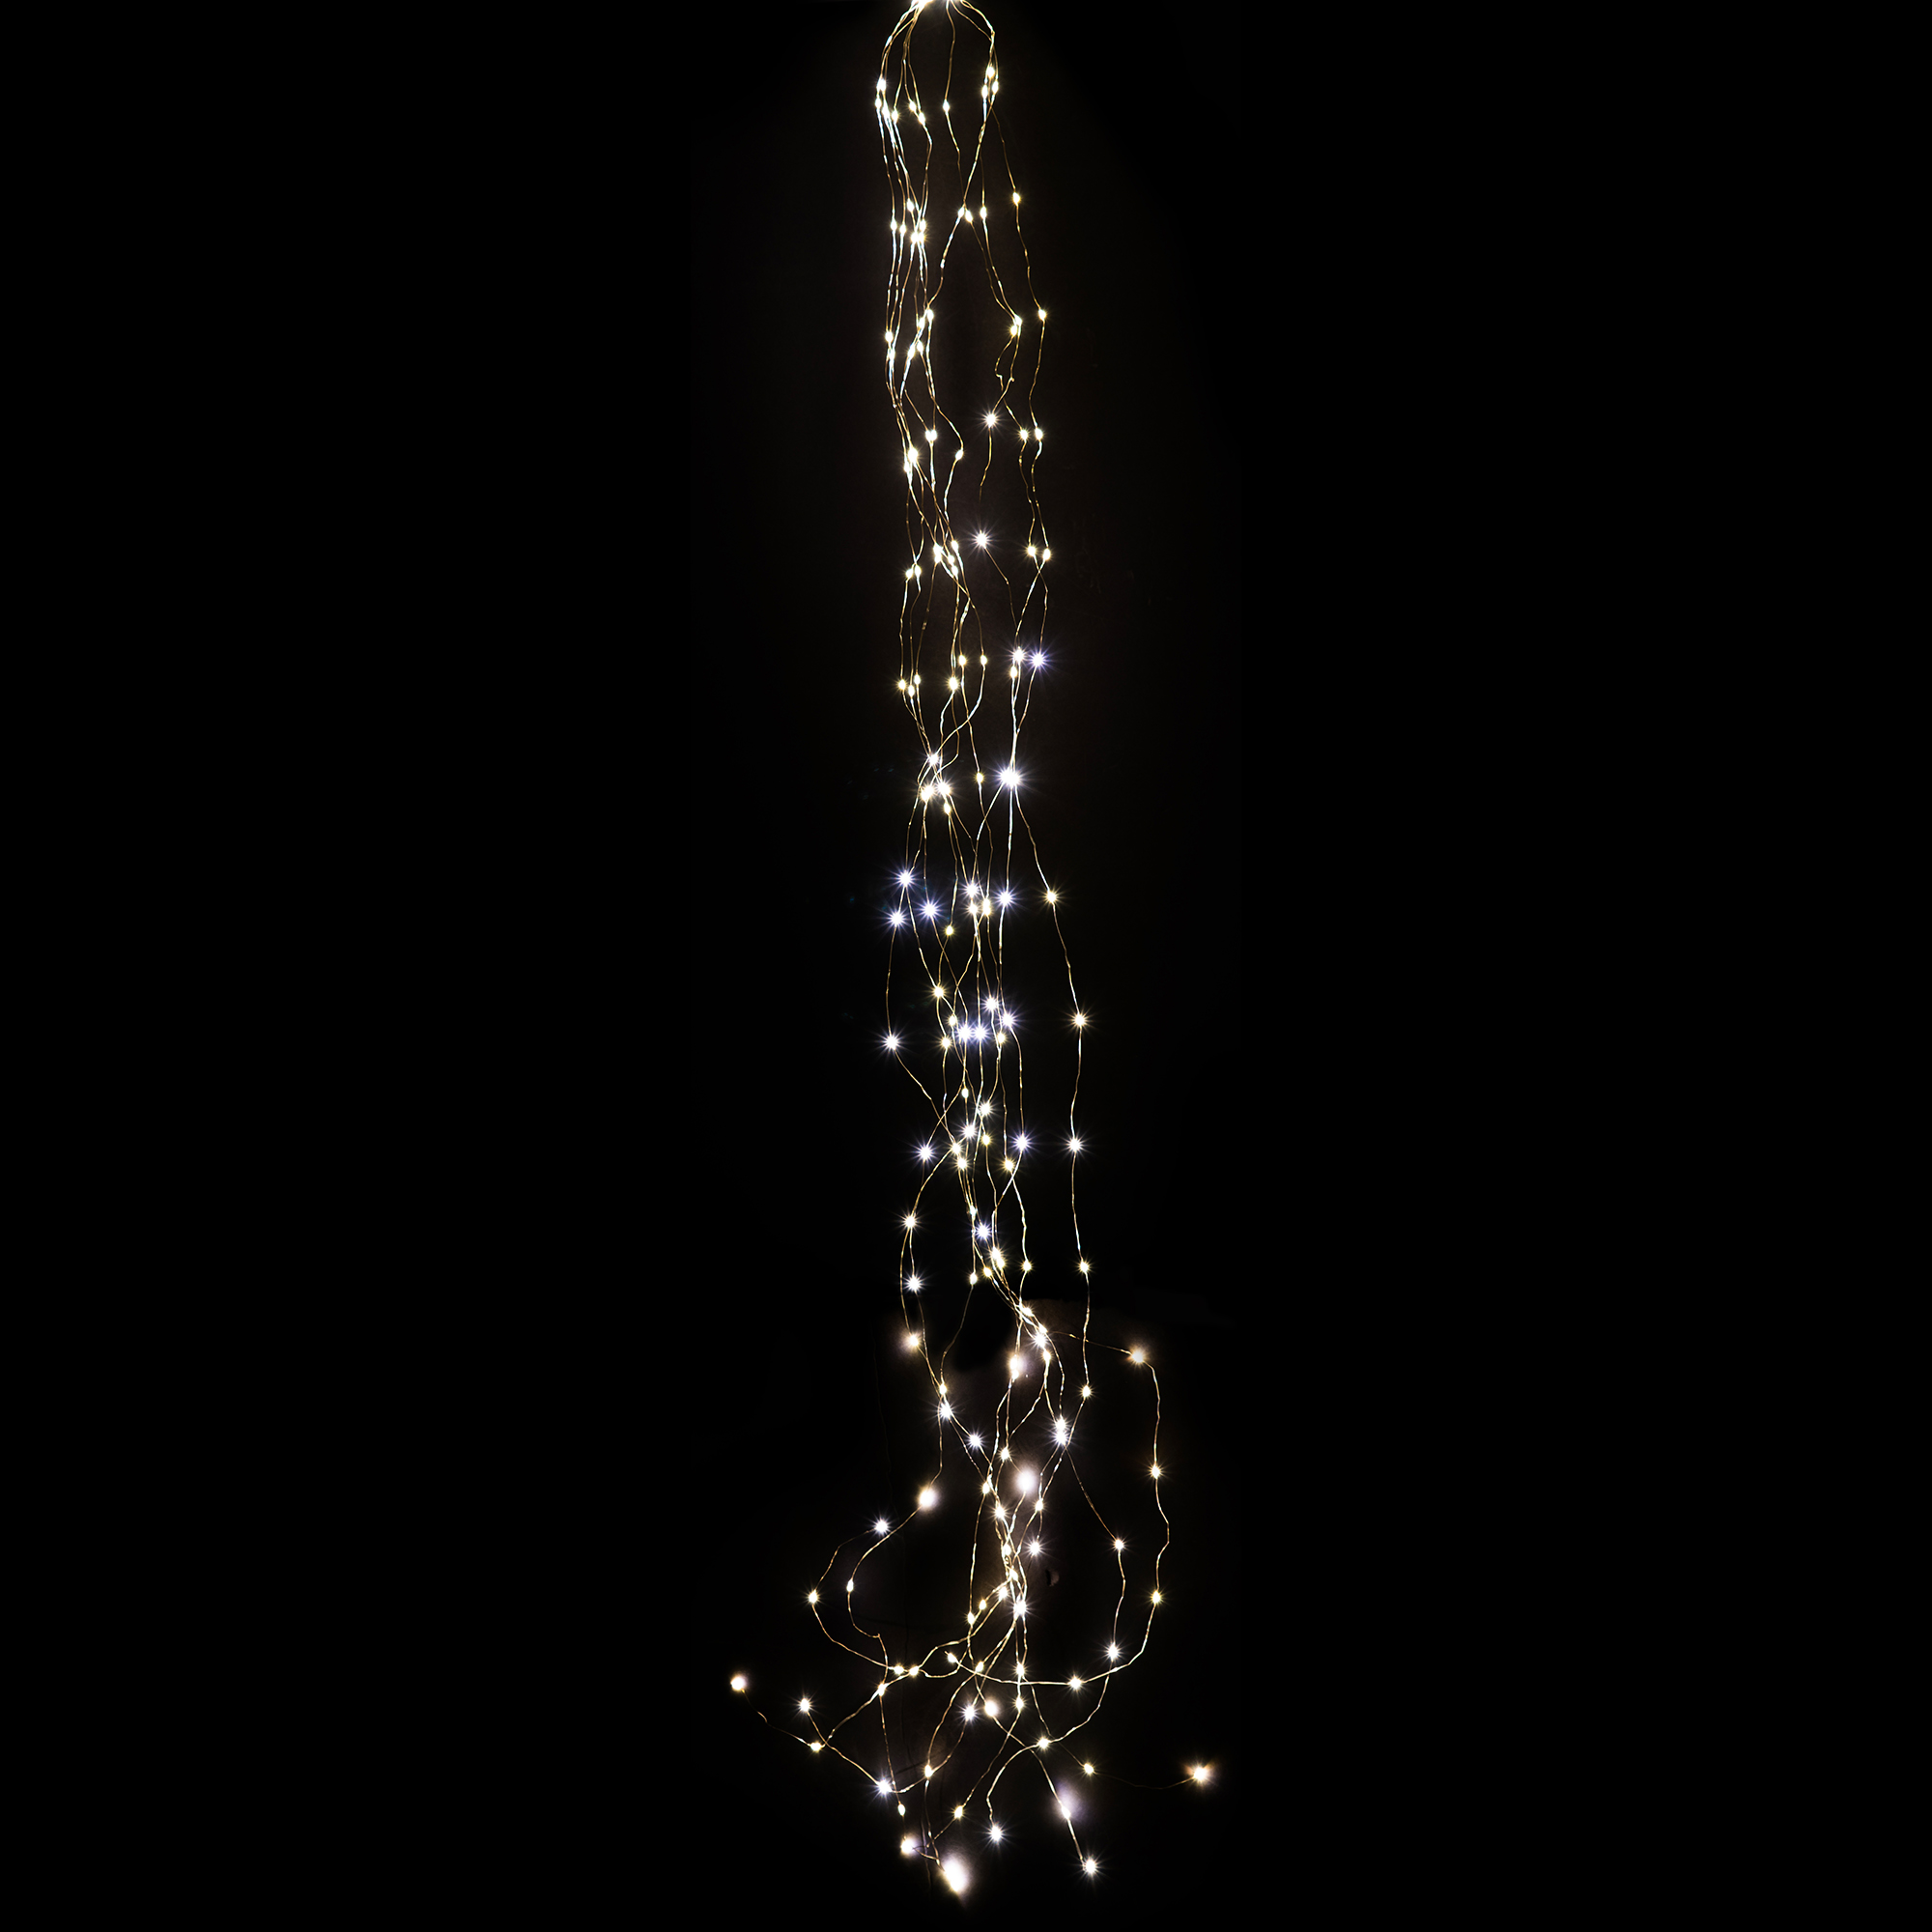 LED Weeping Willow Branch Light 6ft - Warm White